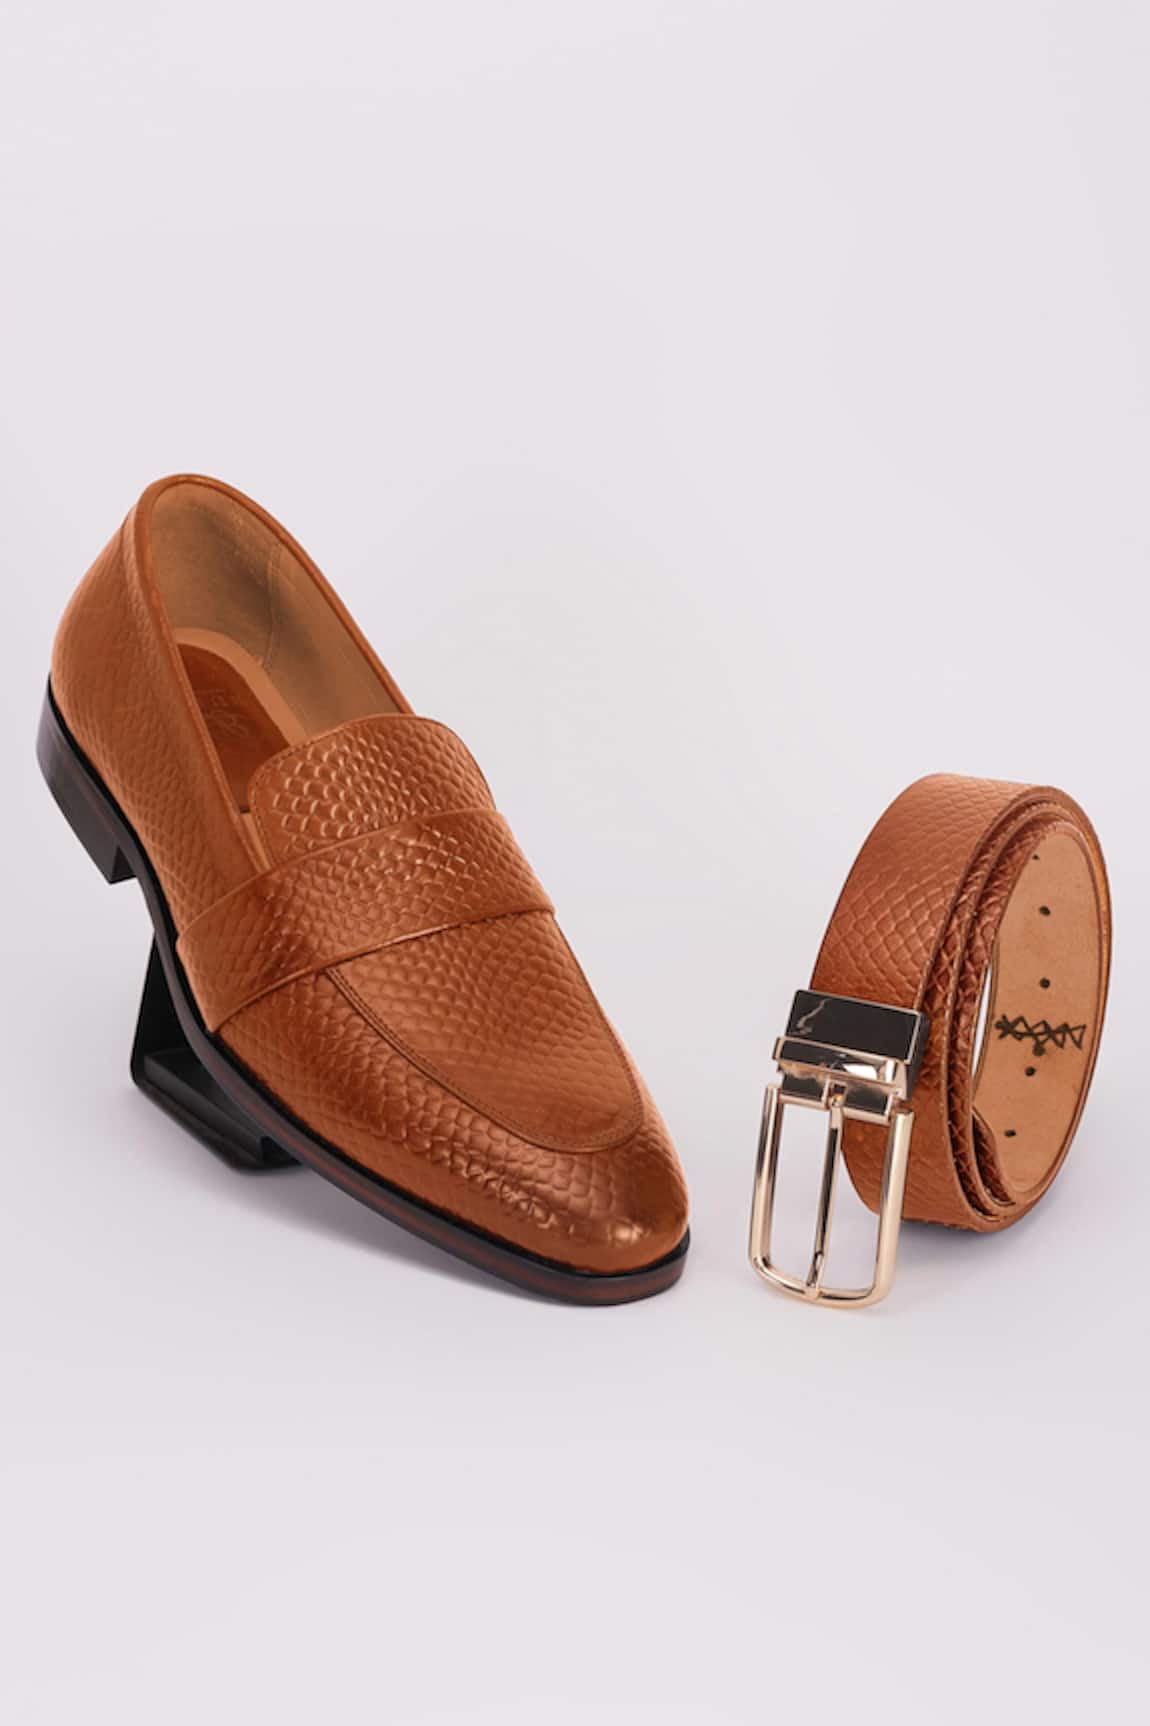 BUBBER COUTURE Mason Mesh Pointed-Toe Moccasin Shoes & Belt Set